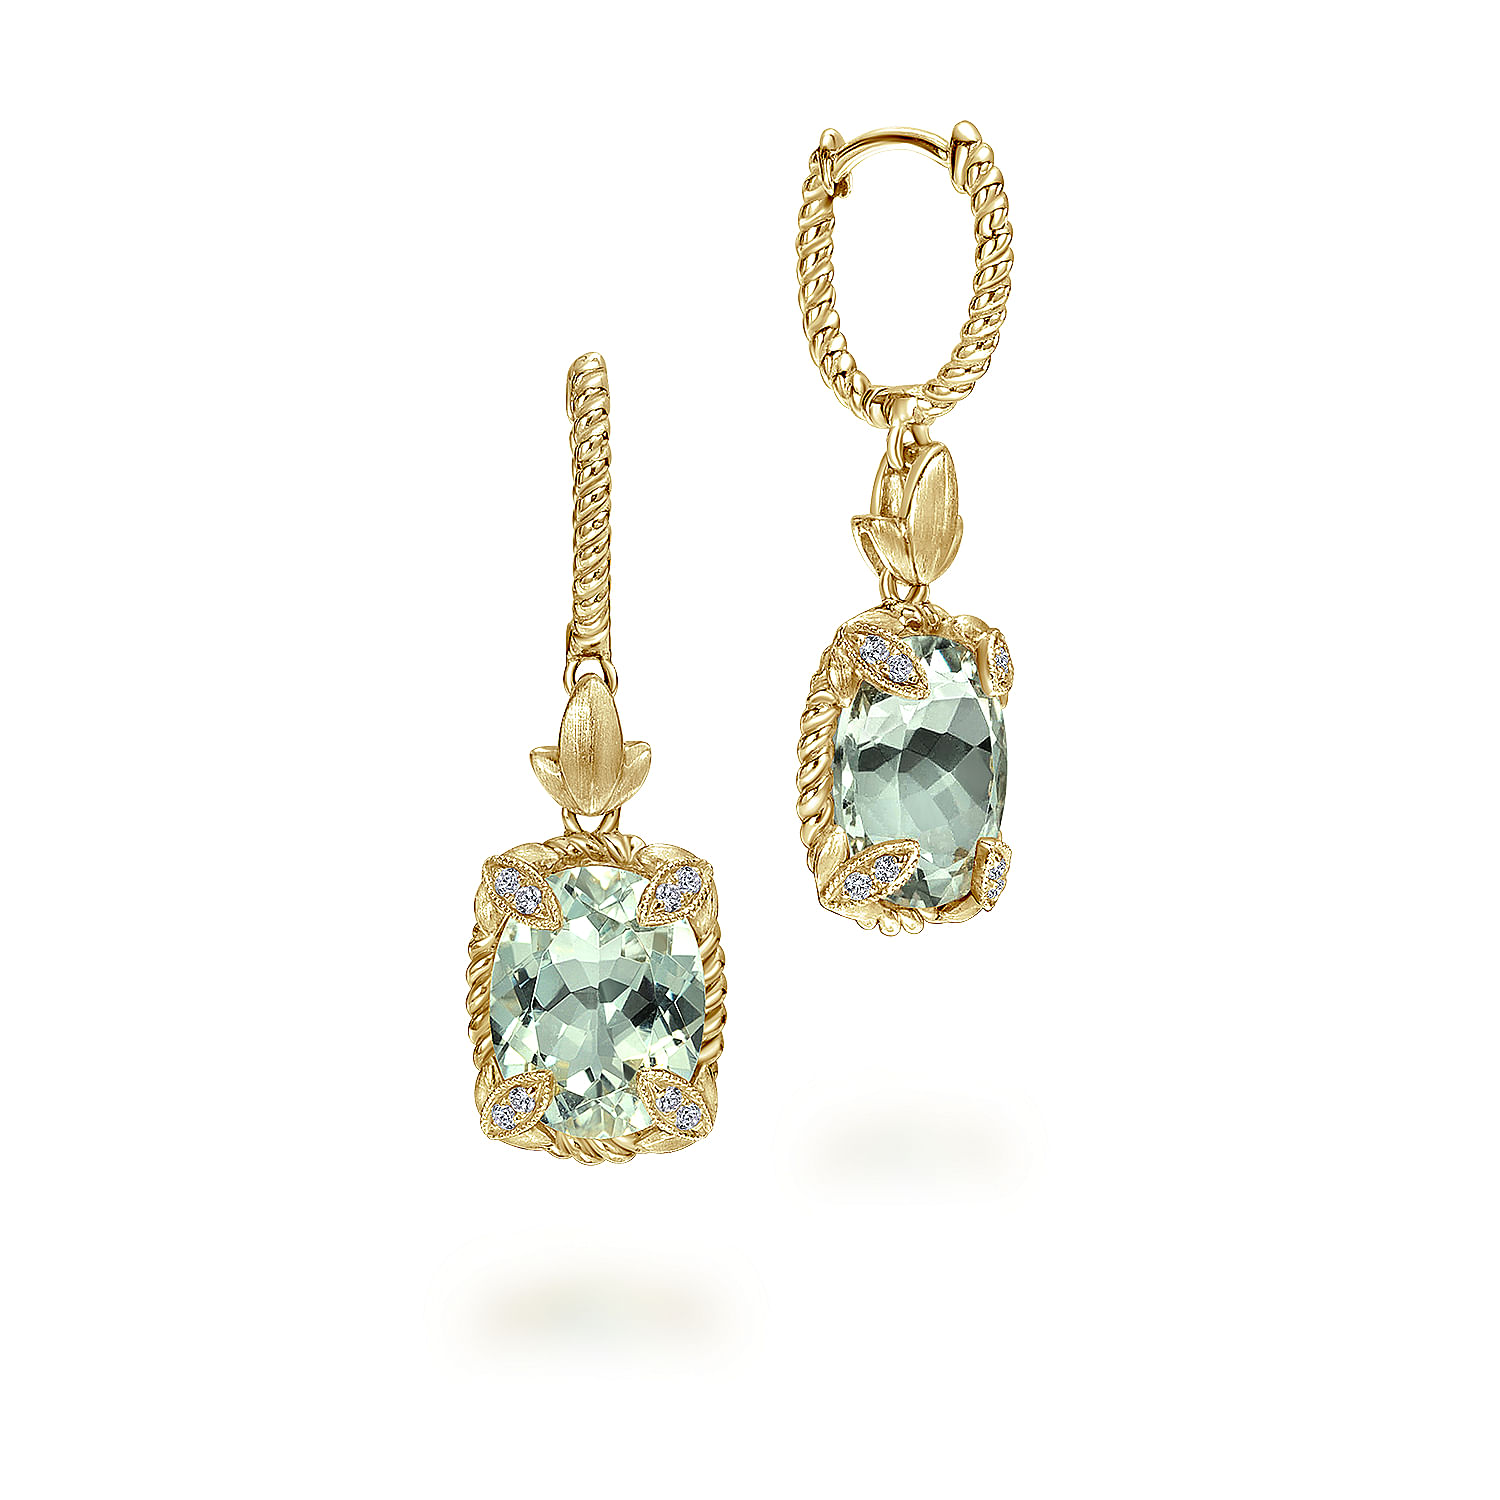 14K Yellow Gold Diamond and Oval Green Amethyst Drop Earrings with Twisted Rope Details